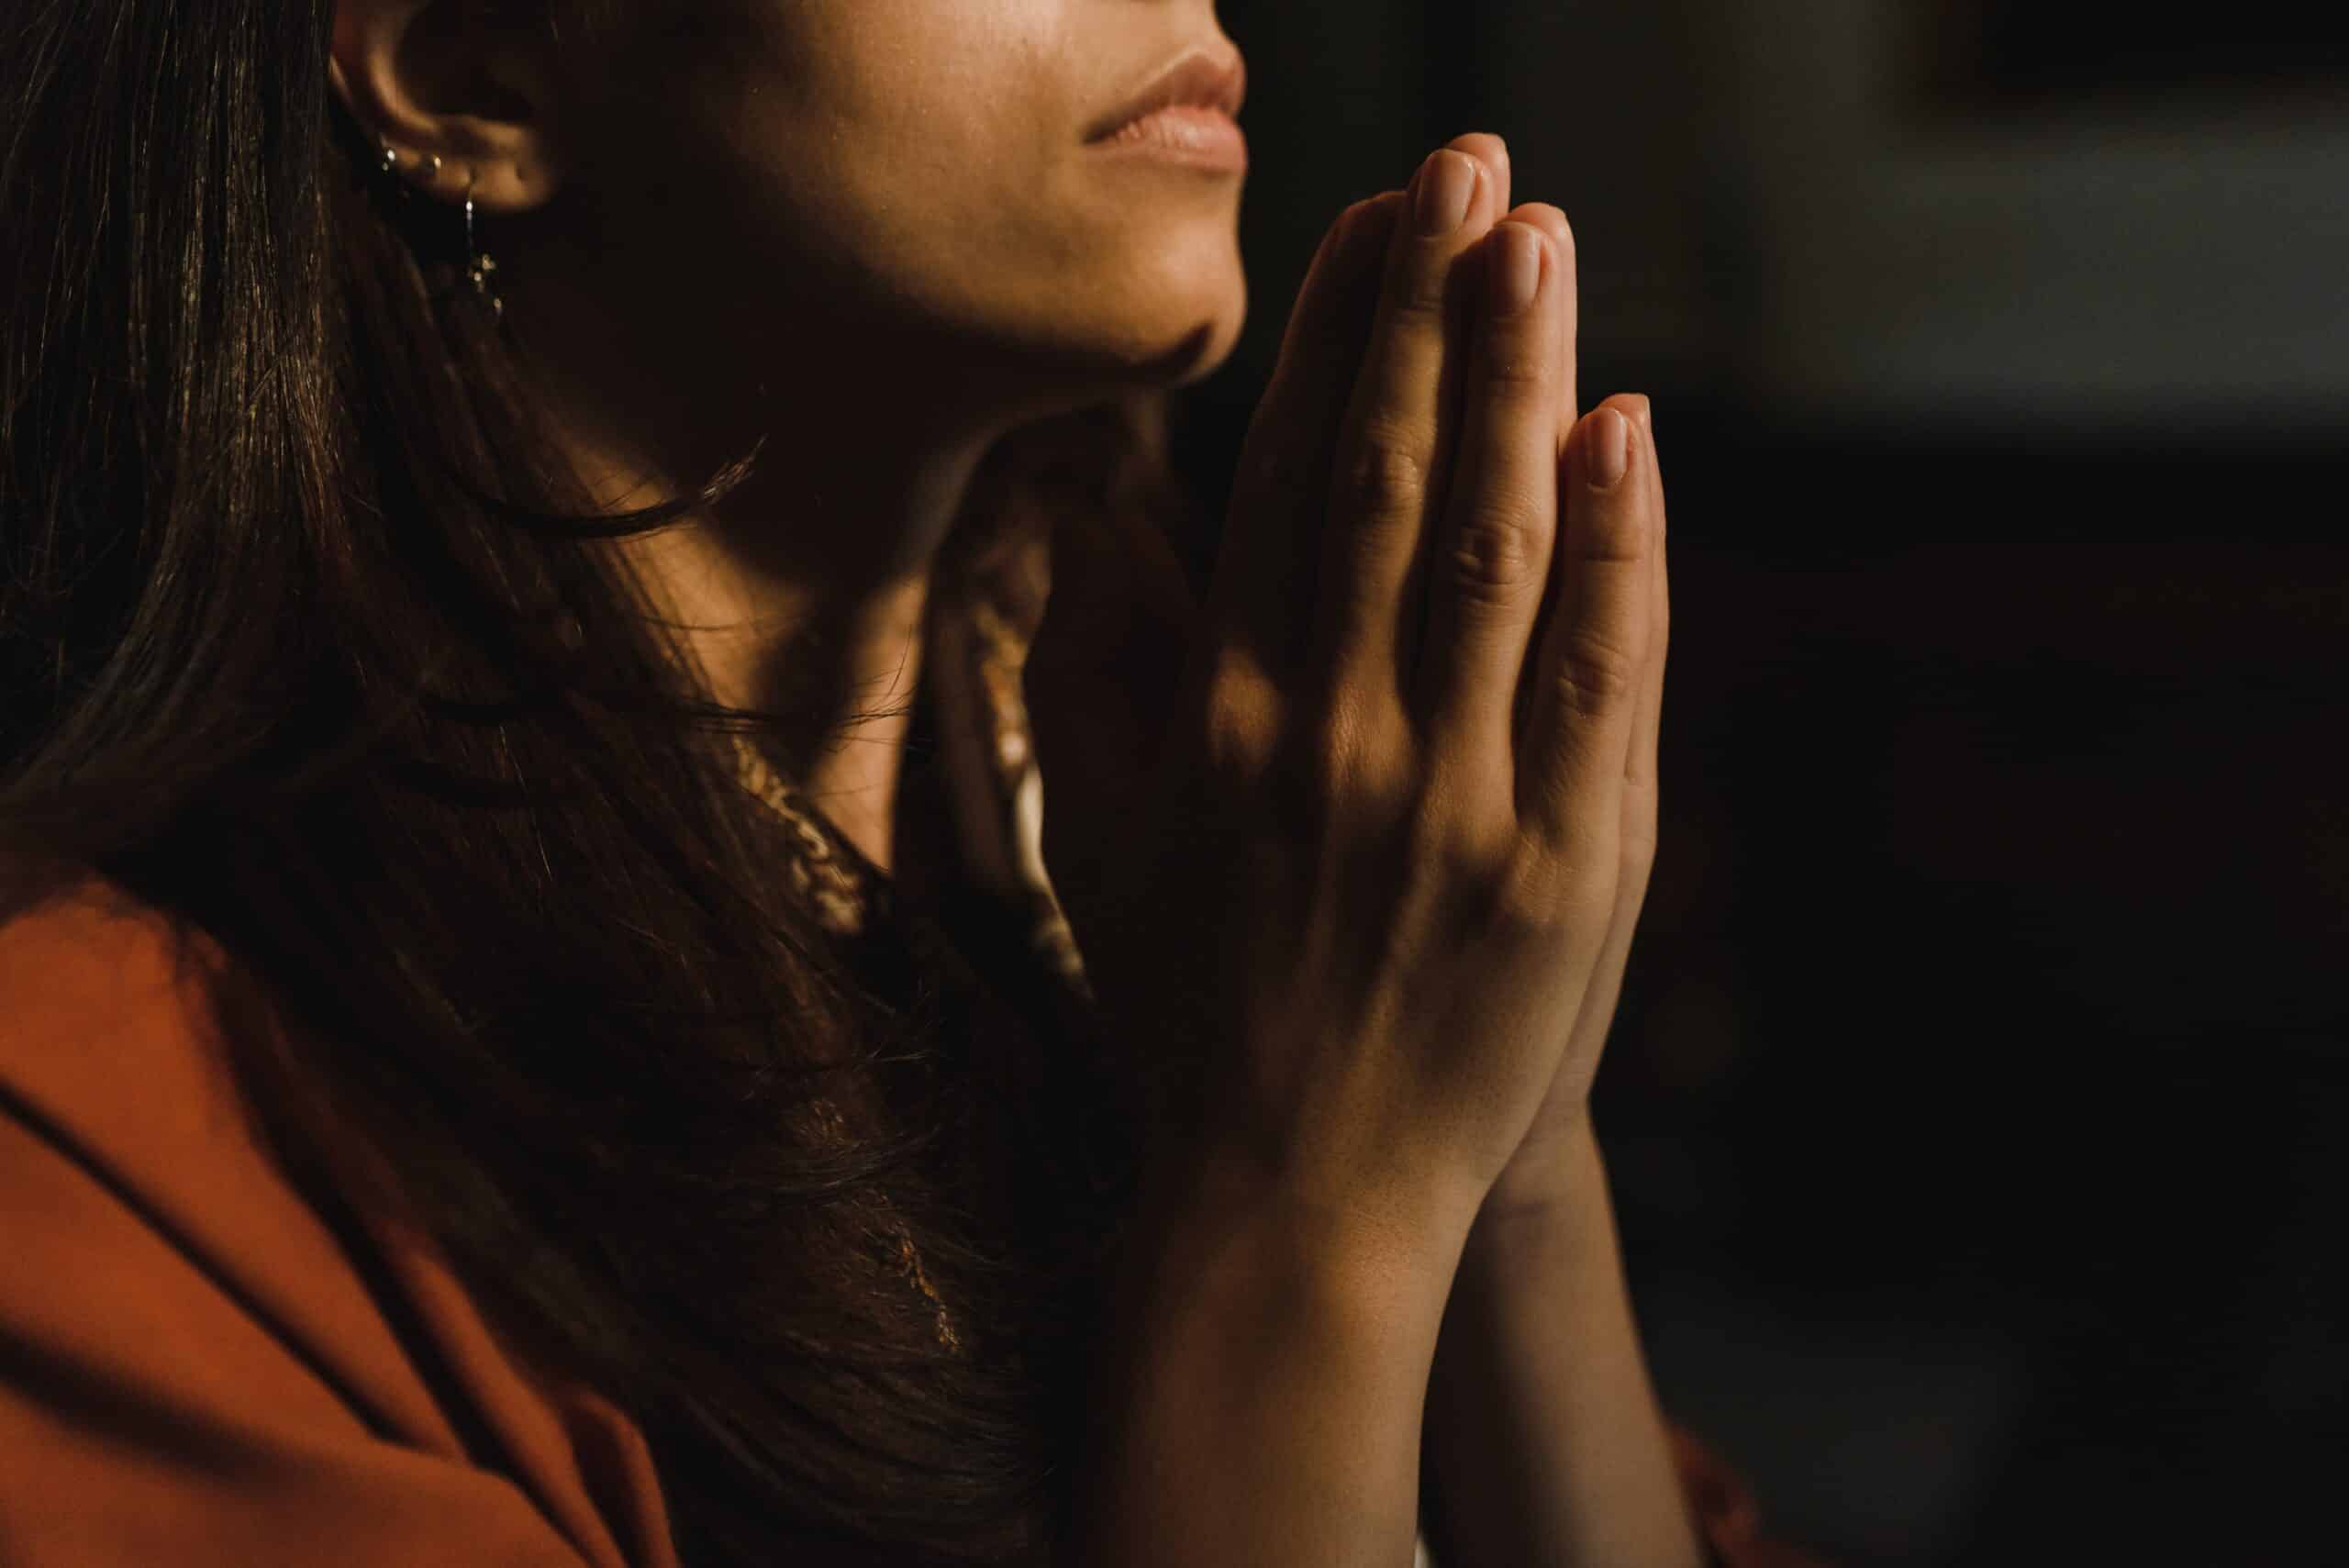 Woman praying | Photo by Arina Krasnikova: https://www.pexels.com/photo/a-person-in-orange-shirt-with-hands-together